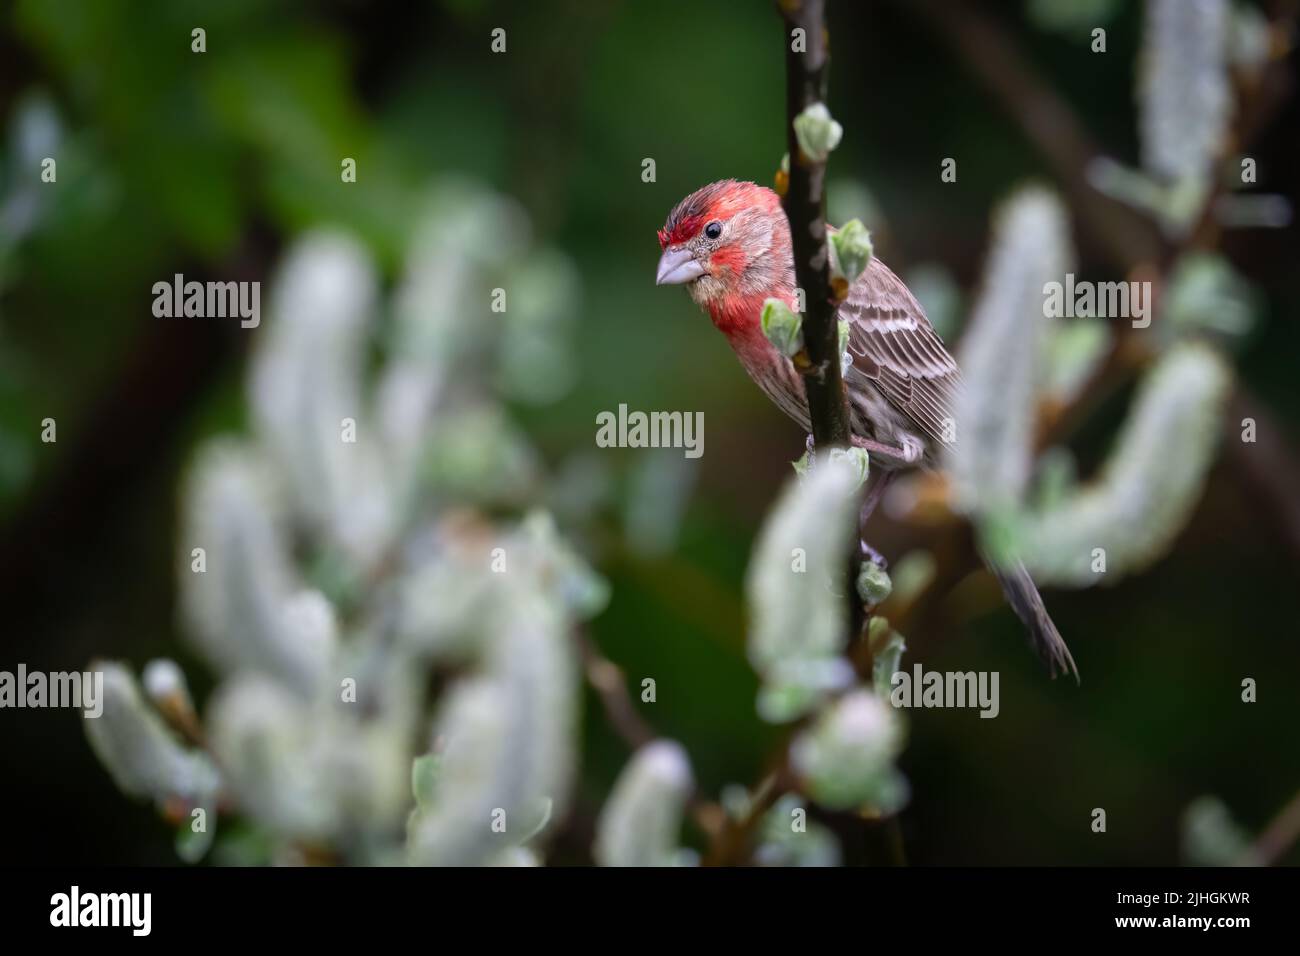 A house finch perched in Scouler's willow on a rainy day in Ocean Shores, Washington. Stock Photo